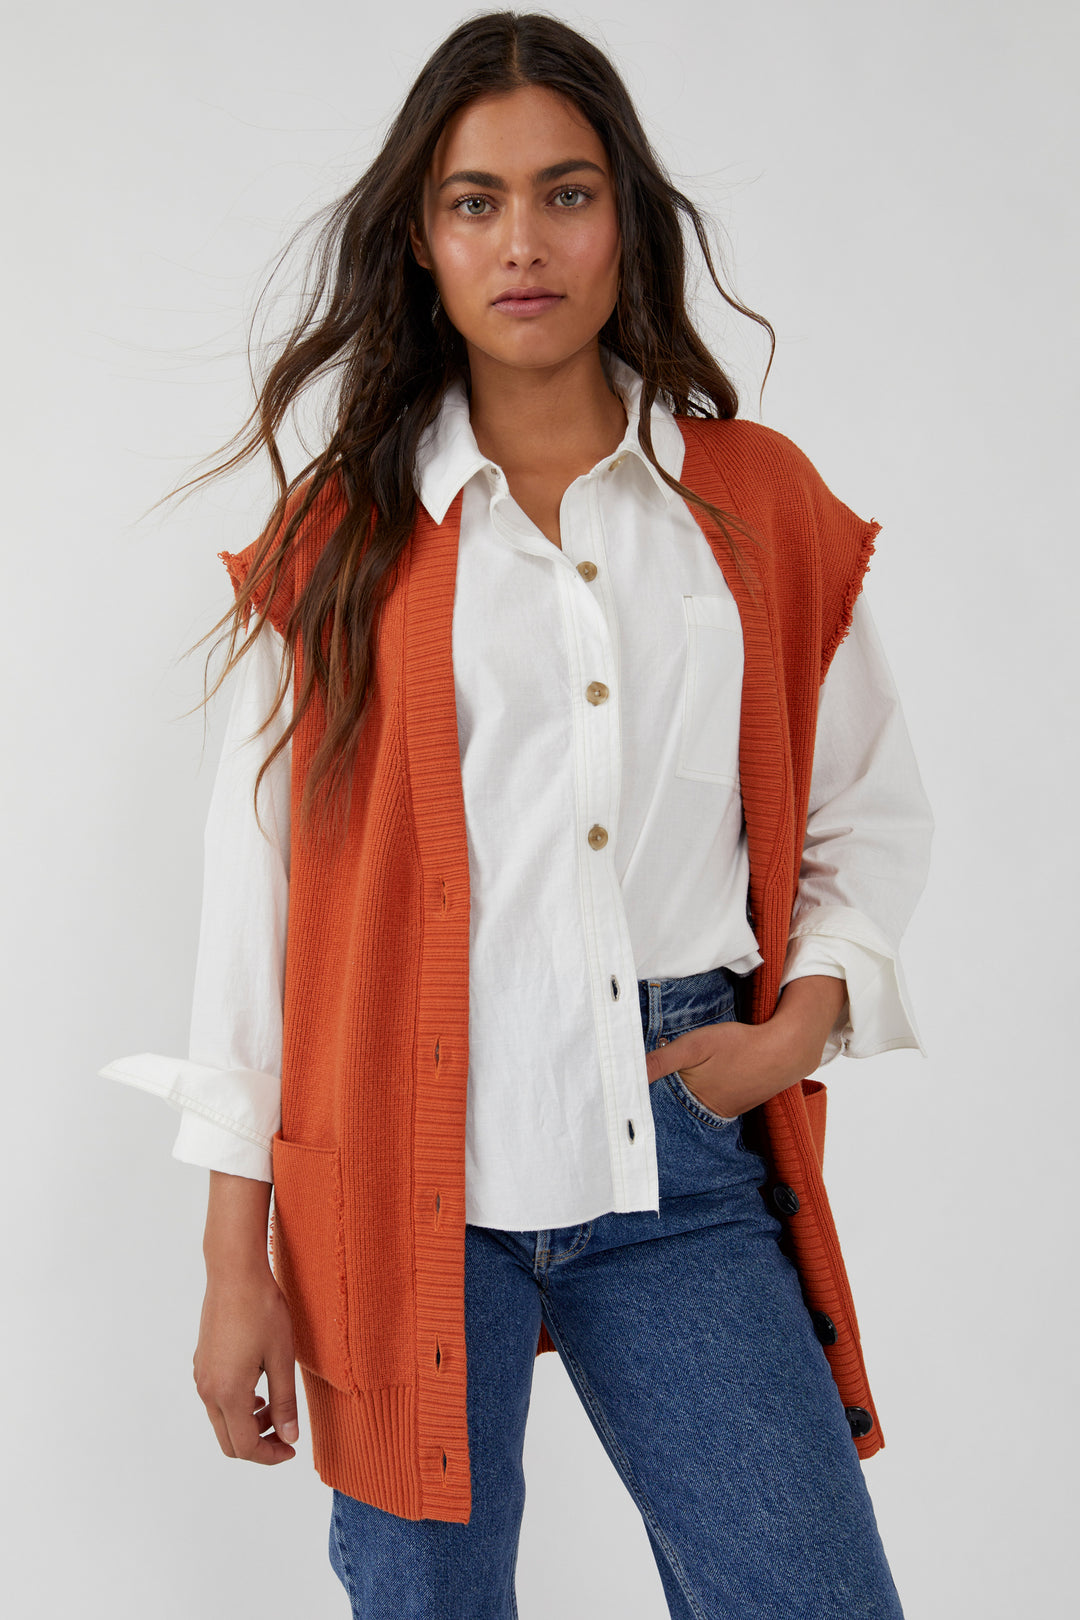 Free People Oakleigh Vest